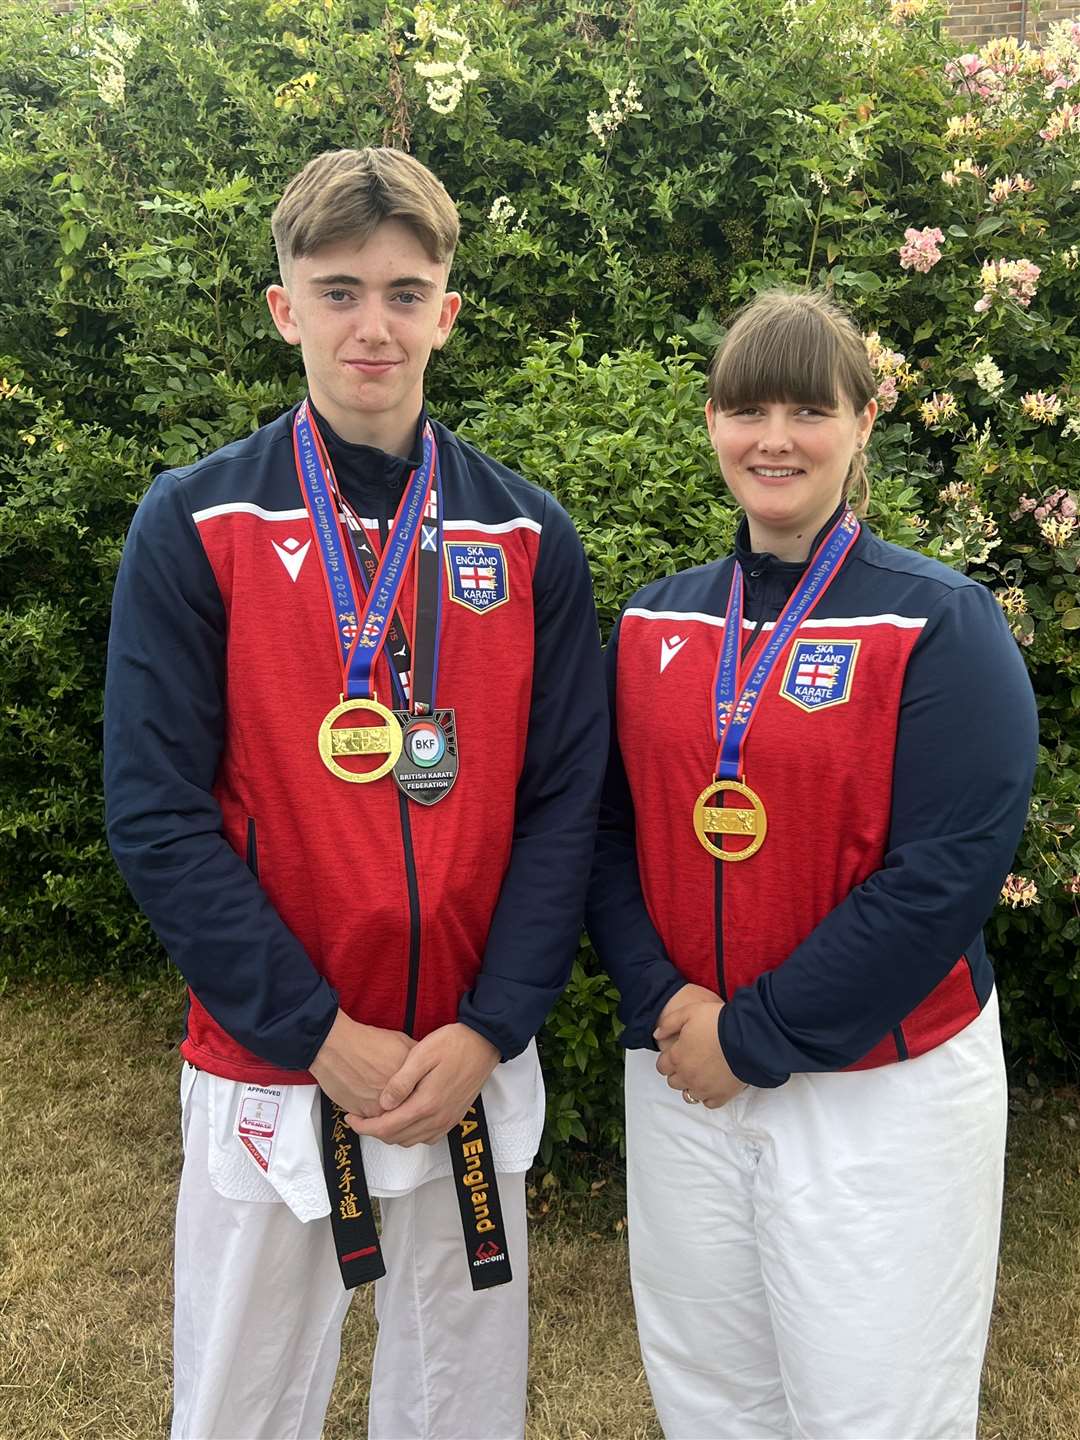 Gold medallists Jake Worton and Millie Knight